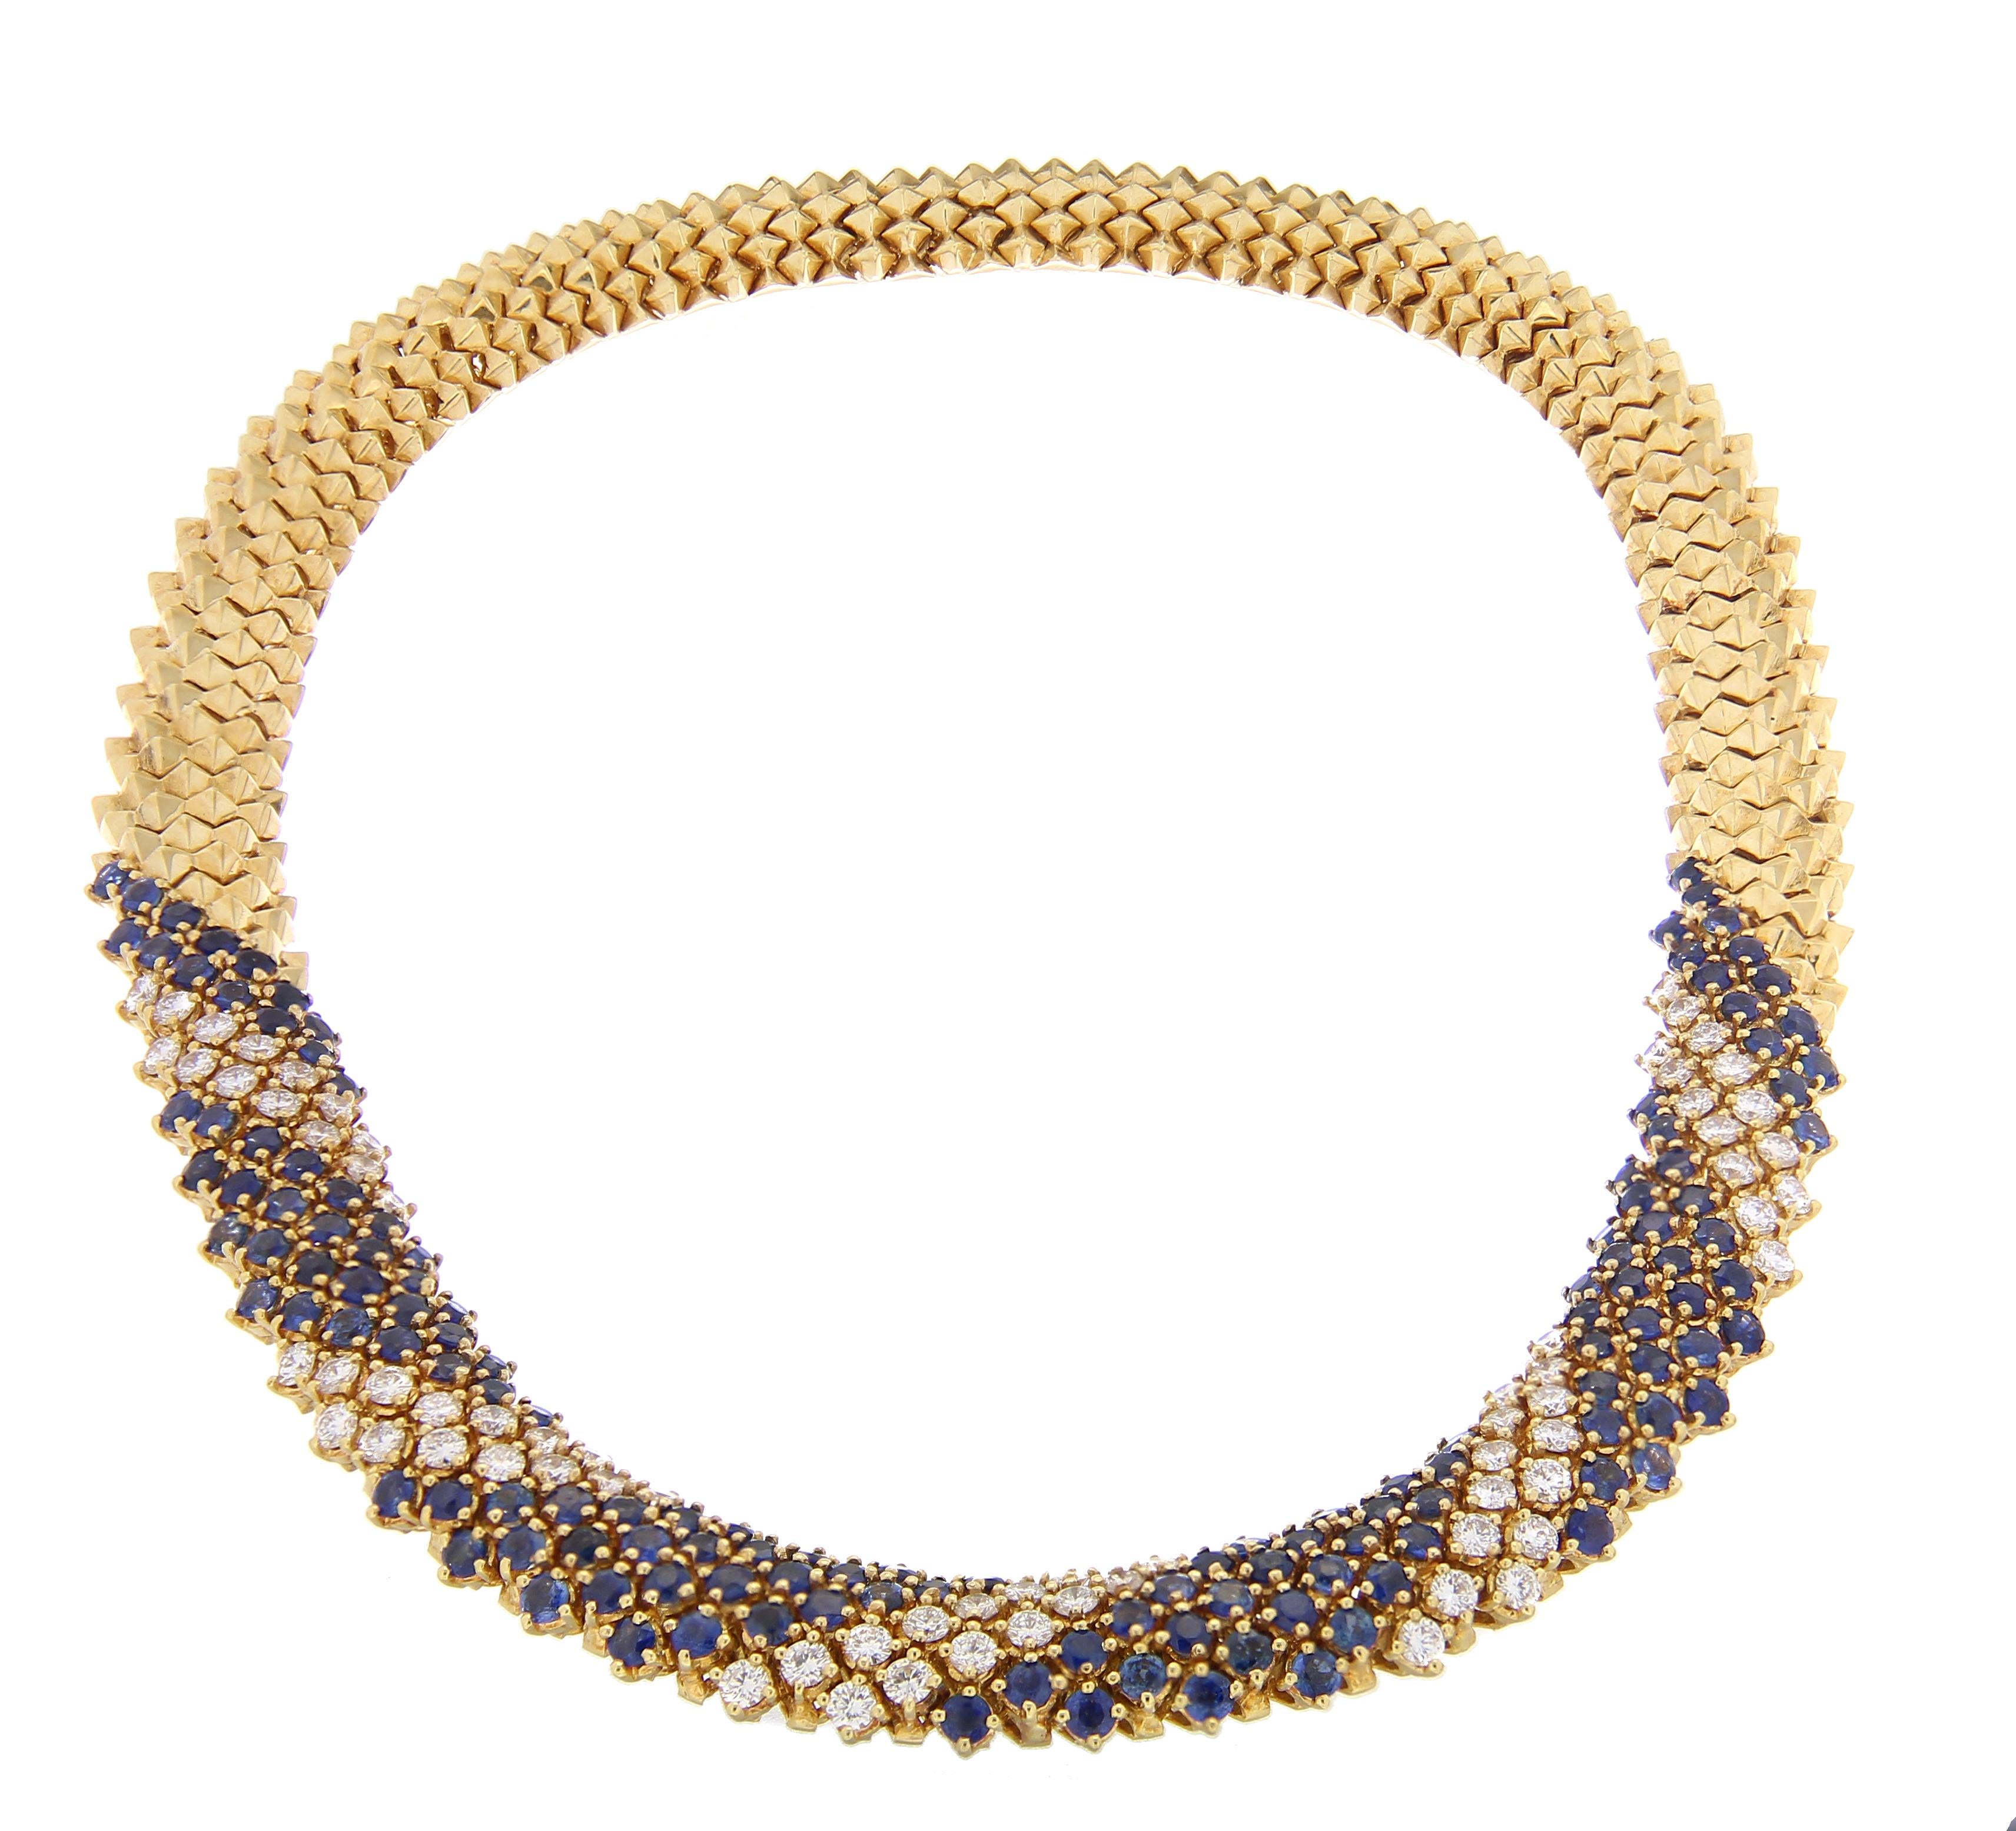 Unique Snake 18kt Yellow Gold Necklace 23 Ct Blue Sapphires 7.42 White Diamonds For Sale 2